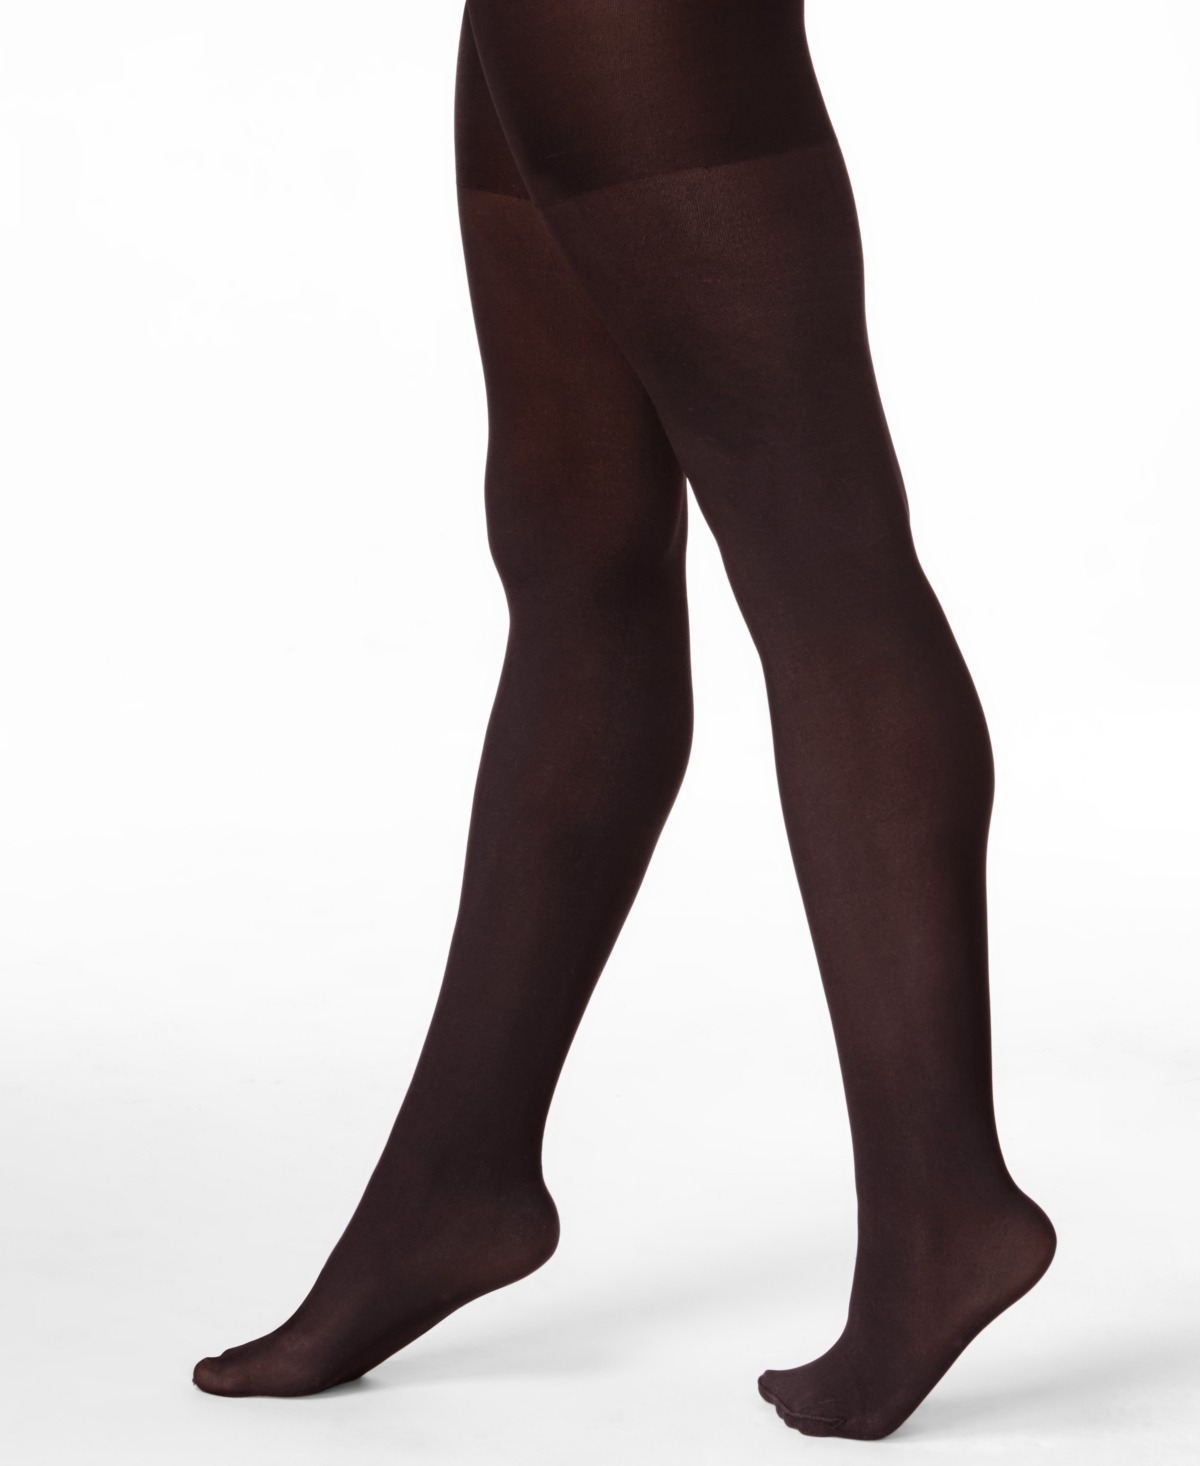 Spanx Women's Opaque Reversible Tummy Control Tights, also